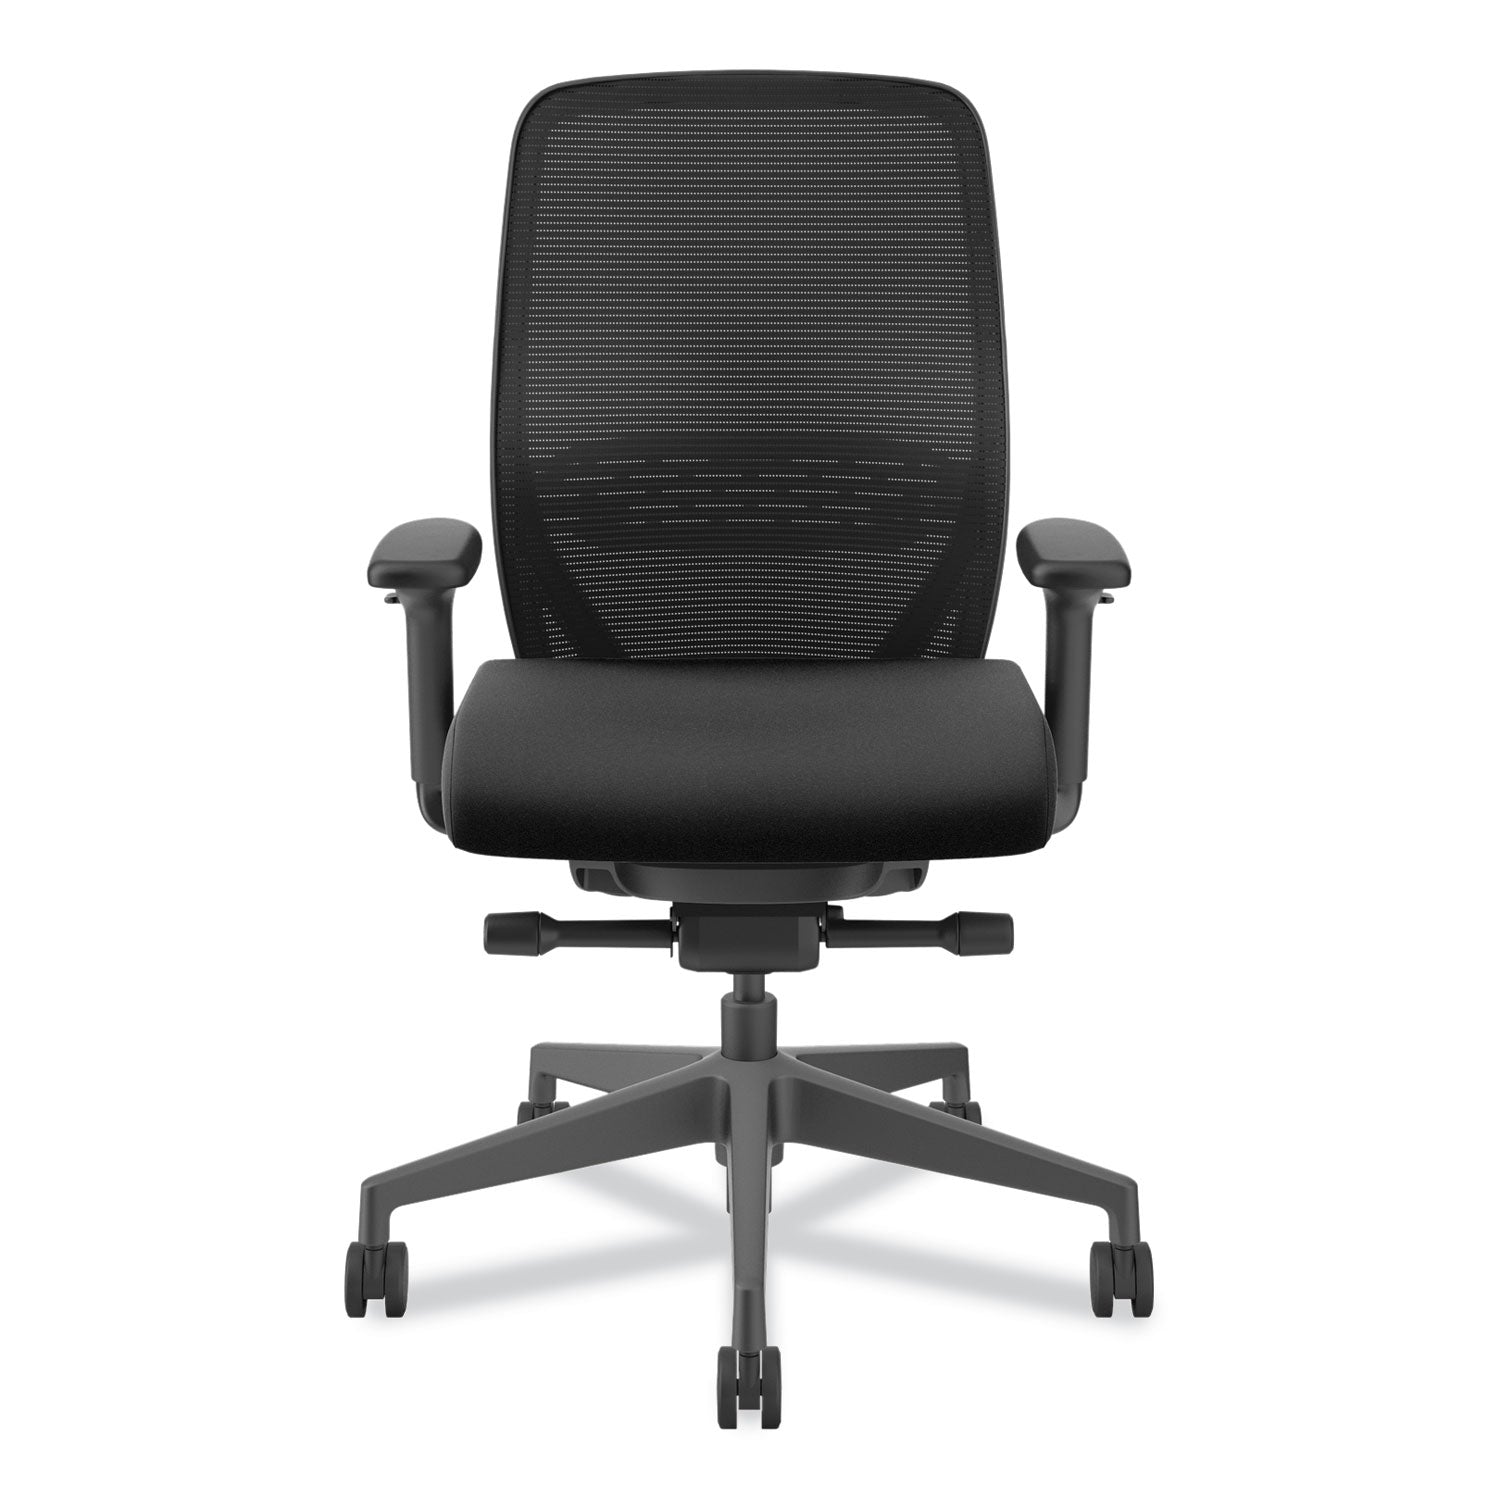 nucleus-series-recharge-task-chair-supports-up-to-300-lb-1663-to-2113-seat-height-black-seat-back-black-base_honnr12samc10bt - 2